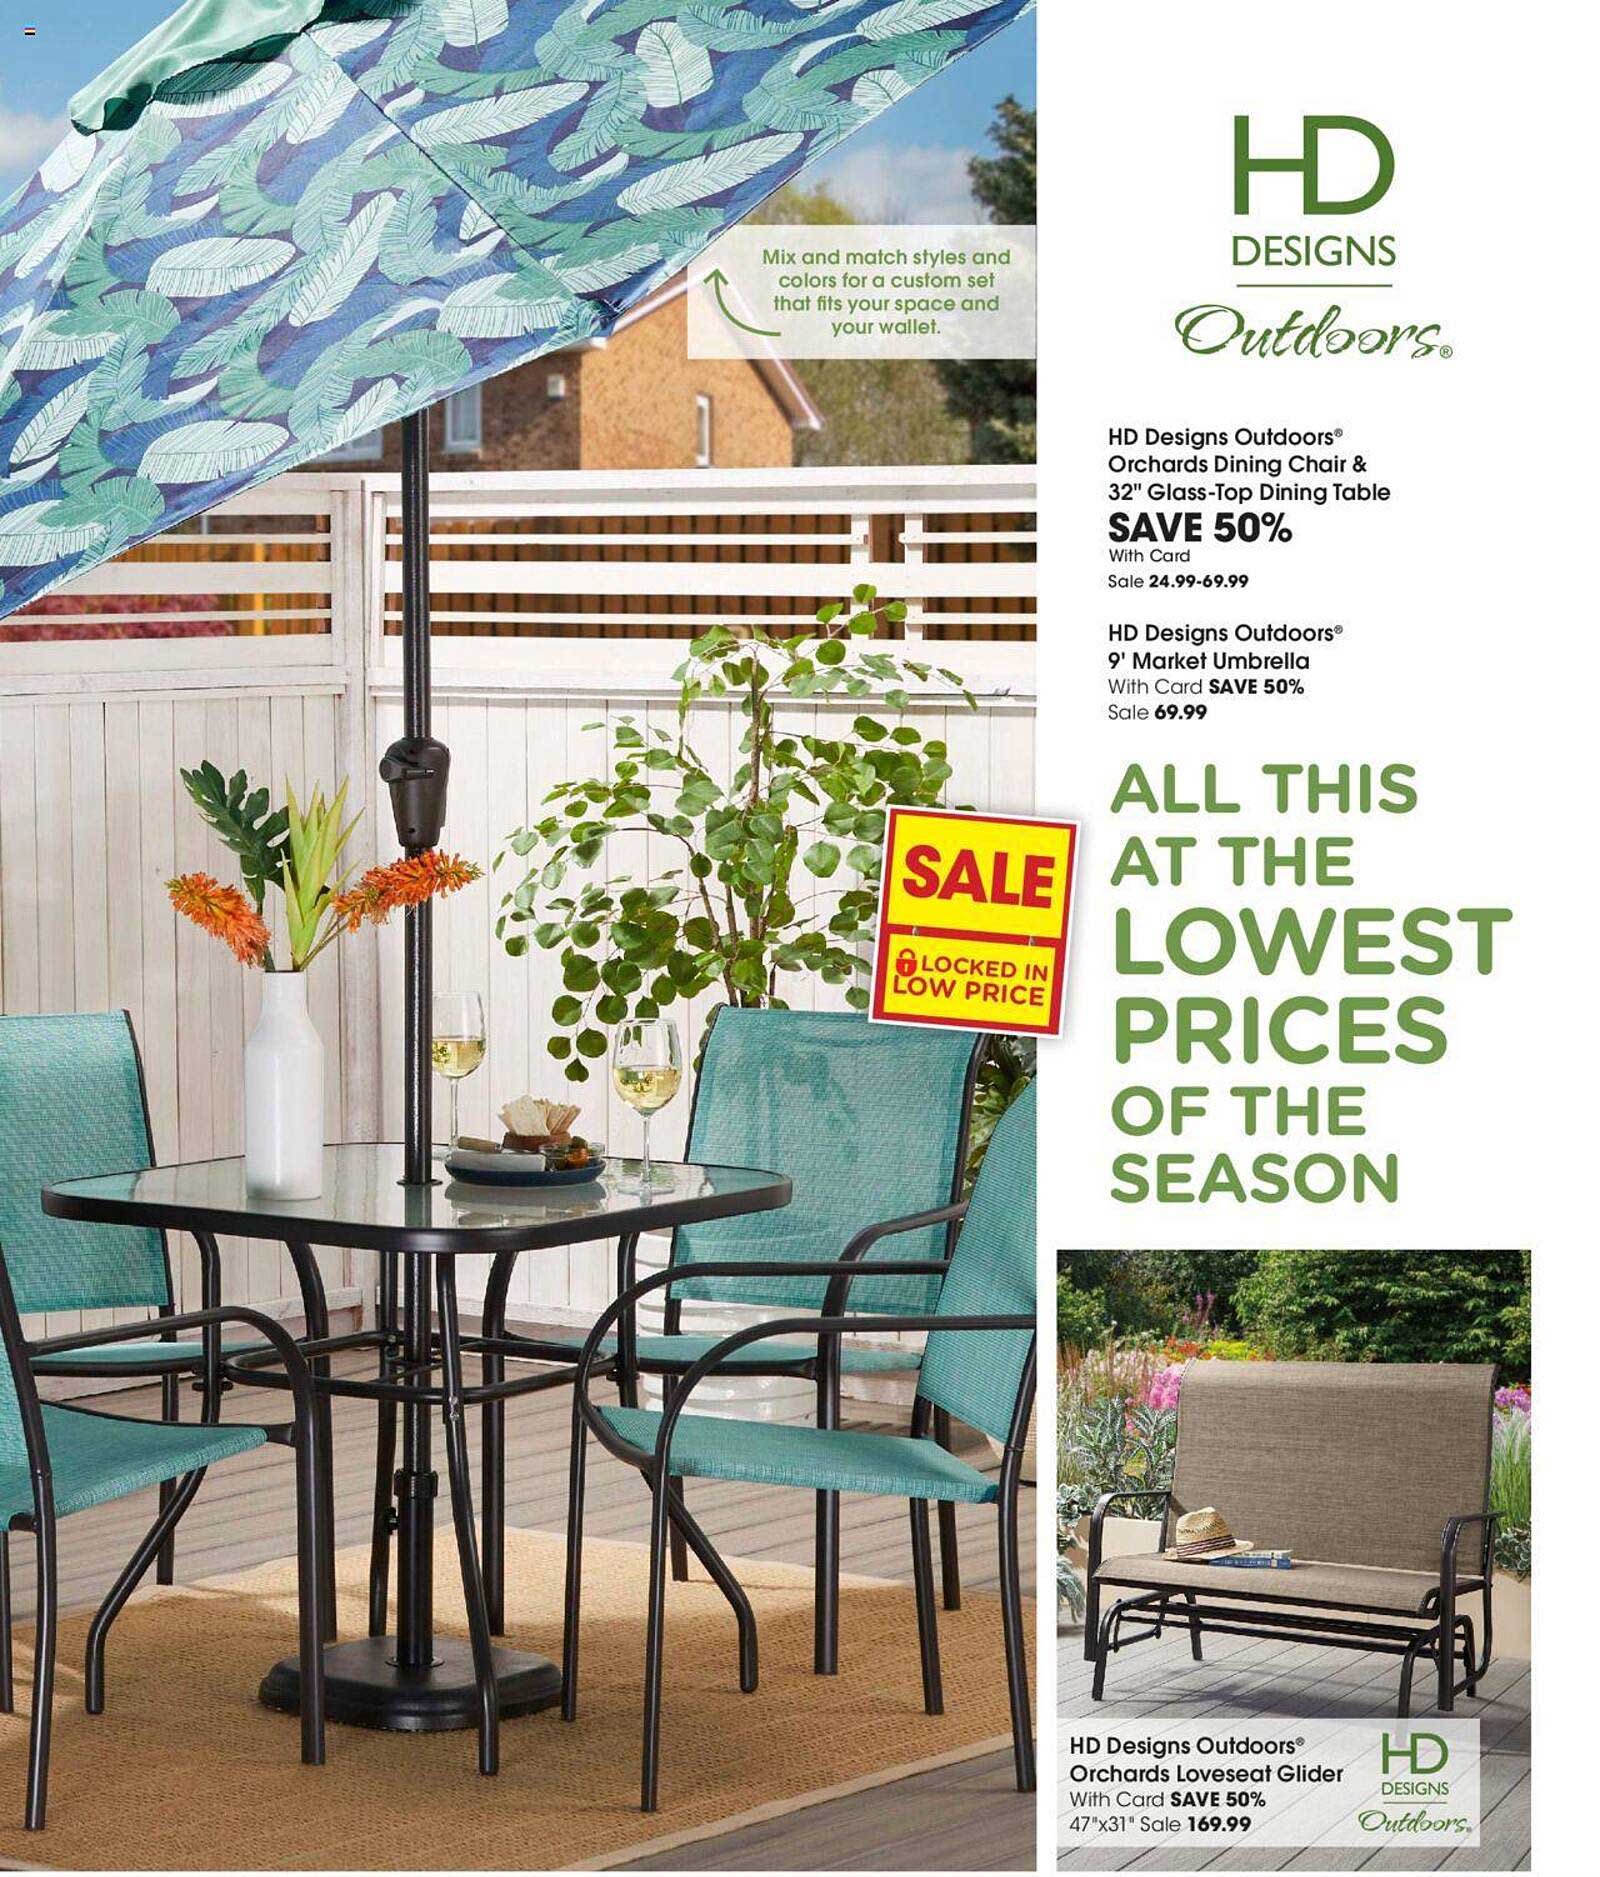 Fred Meyer Hd Designs Outdoors Orchards Dining Chair & 32